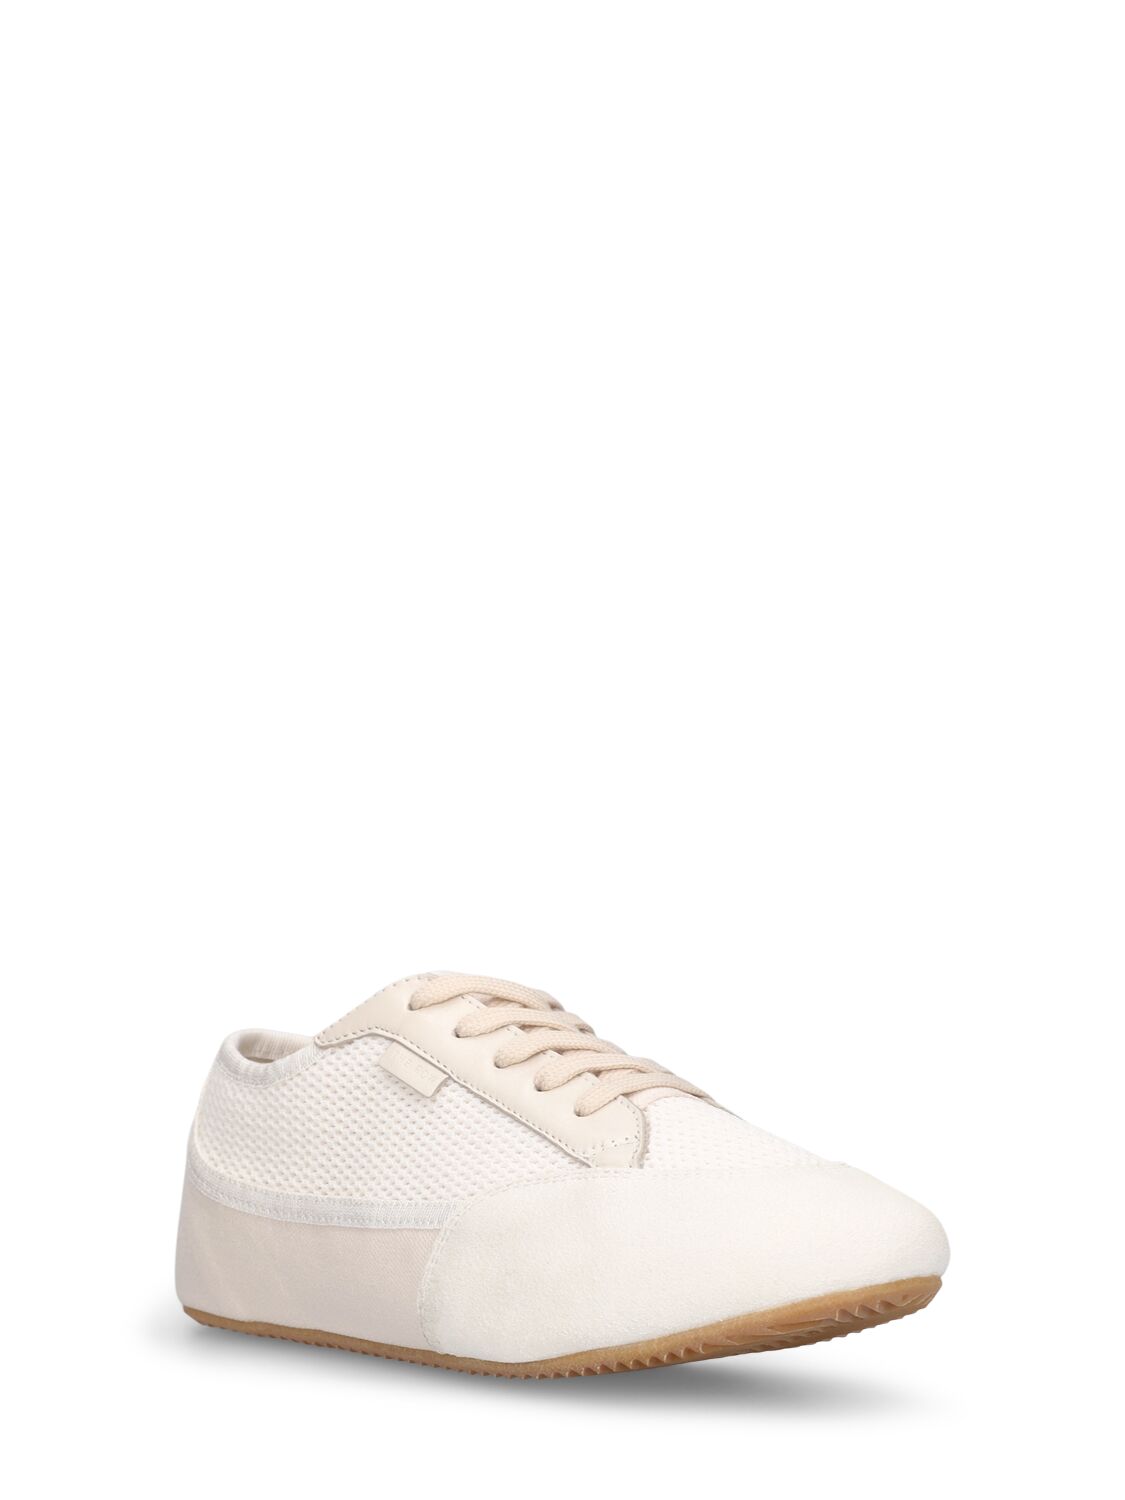 Shop The Row Bonnie Canvas & Suede Sneakers In White